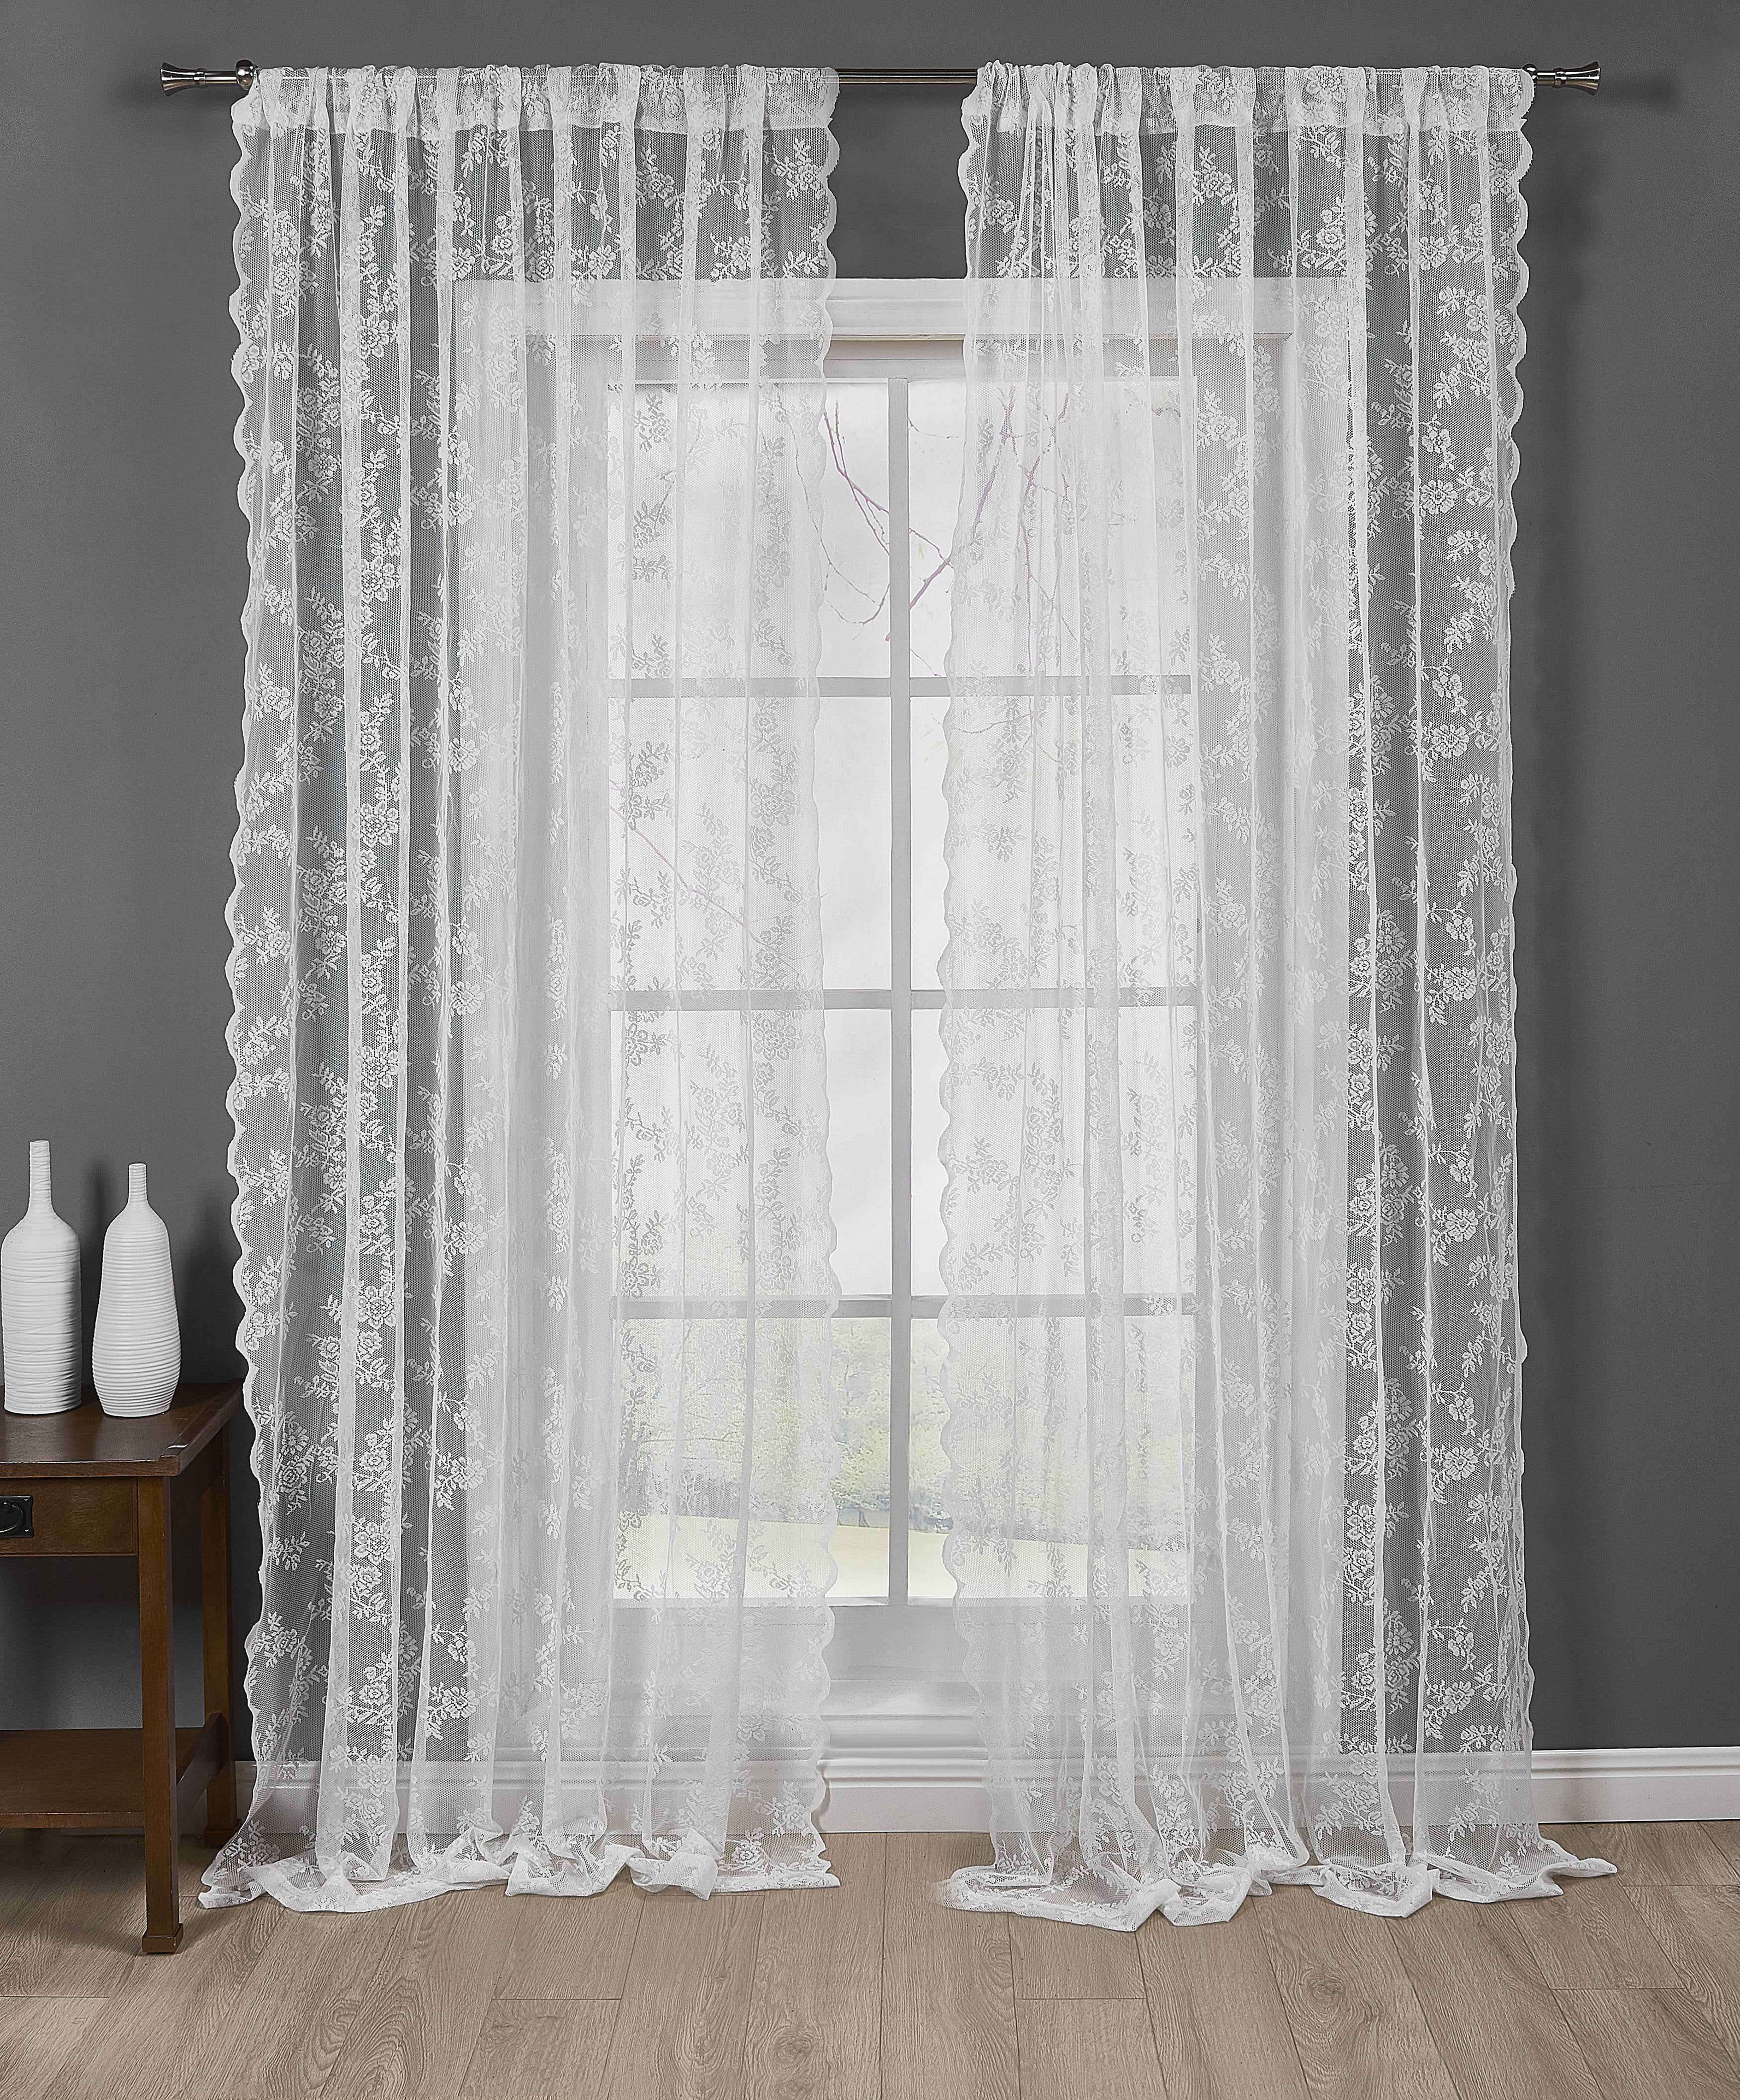 LOUVRE BLIND STYLE WHITE LACE CURTAINS GREAT VALUE CHEAP VALENCIA QUALITY 